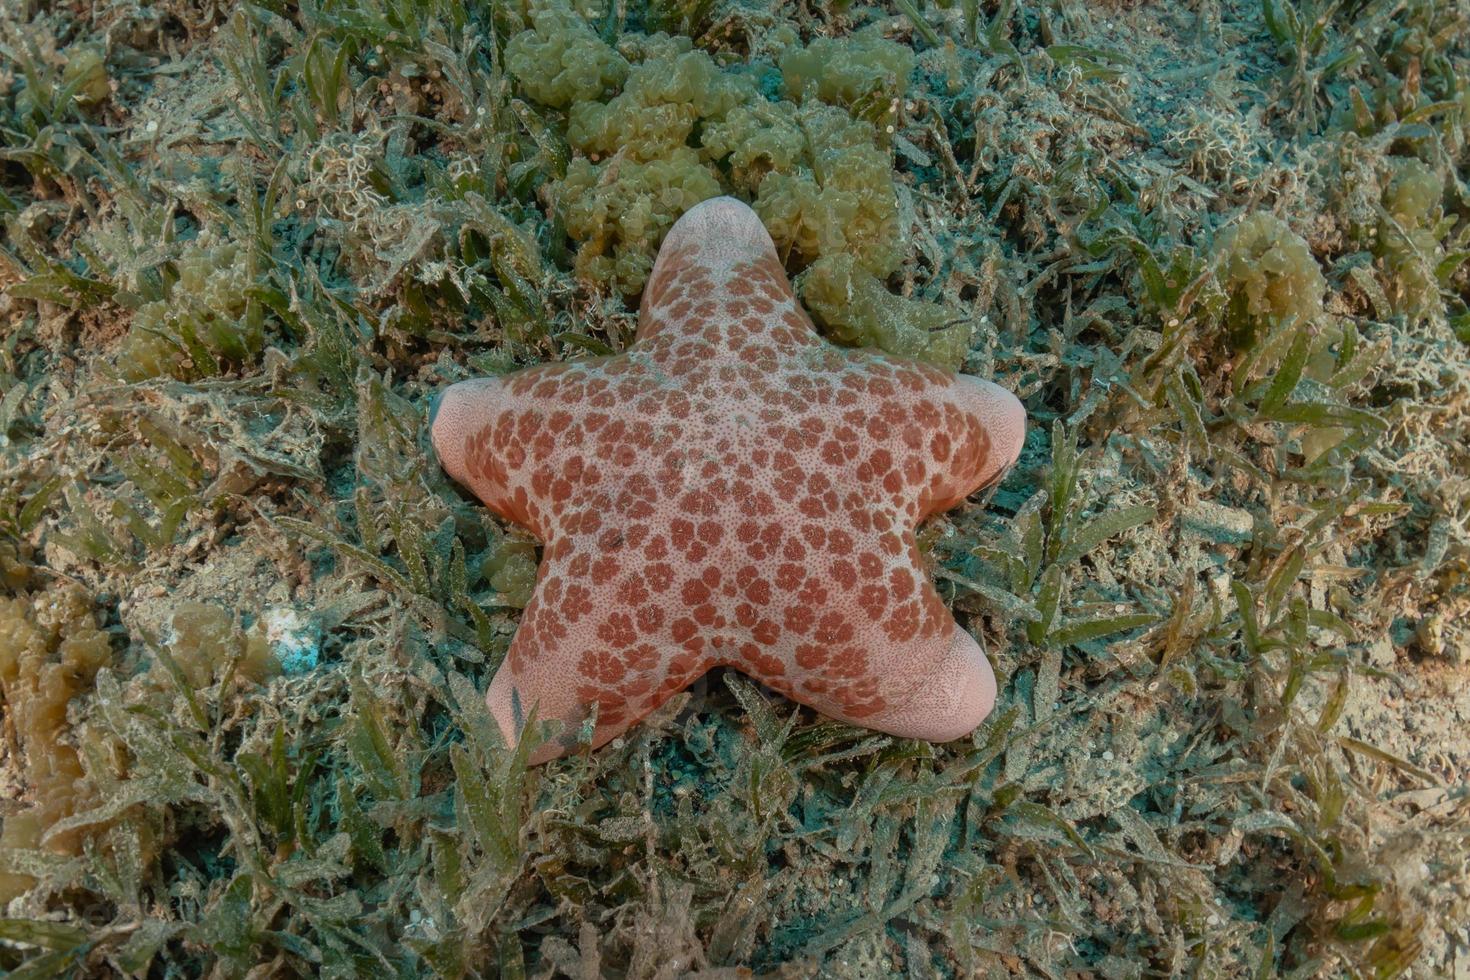 Starfish On the seabed in the Red Sea, Eilat Israel photo